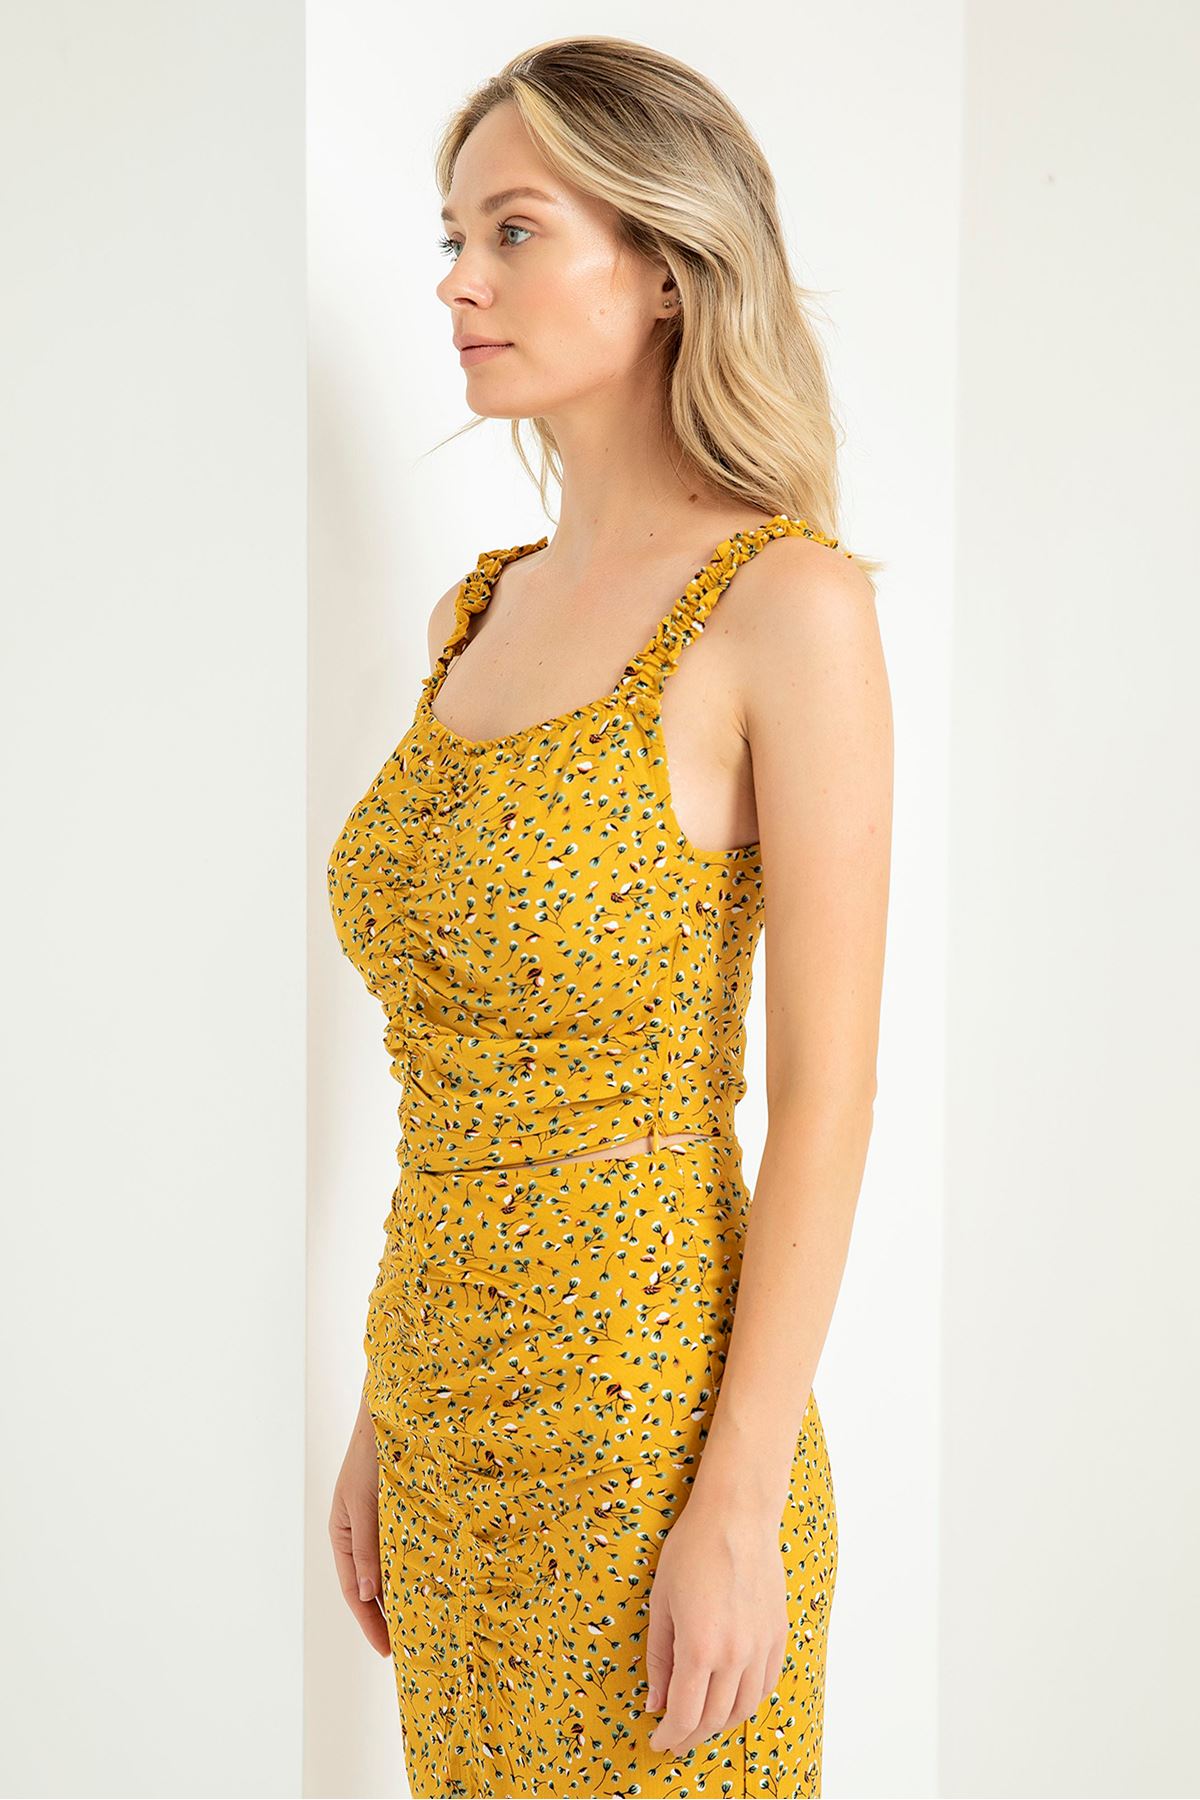 Printed Fabric Square Neckline Floral Pattern With Elastic Blouse - Mustard